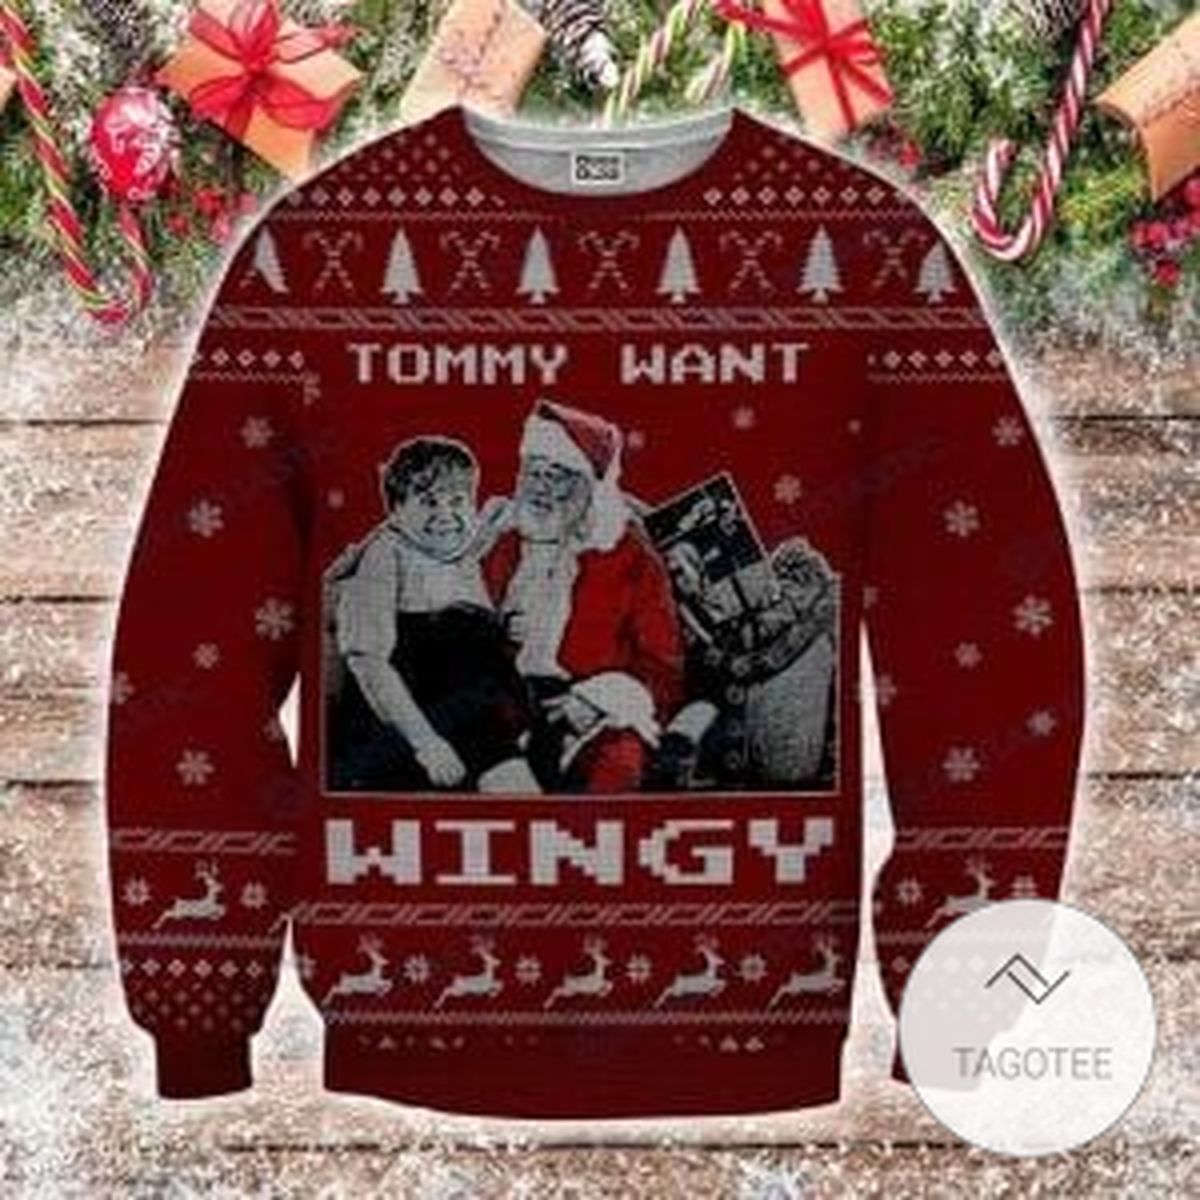 Tommy Want Wingy Tommy Boy Sweatshirt Knitted Ugly Christmas Sweater